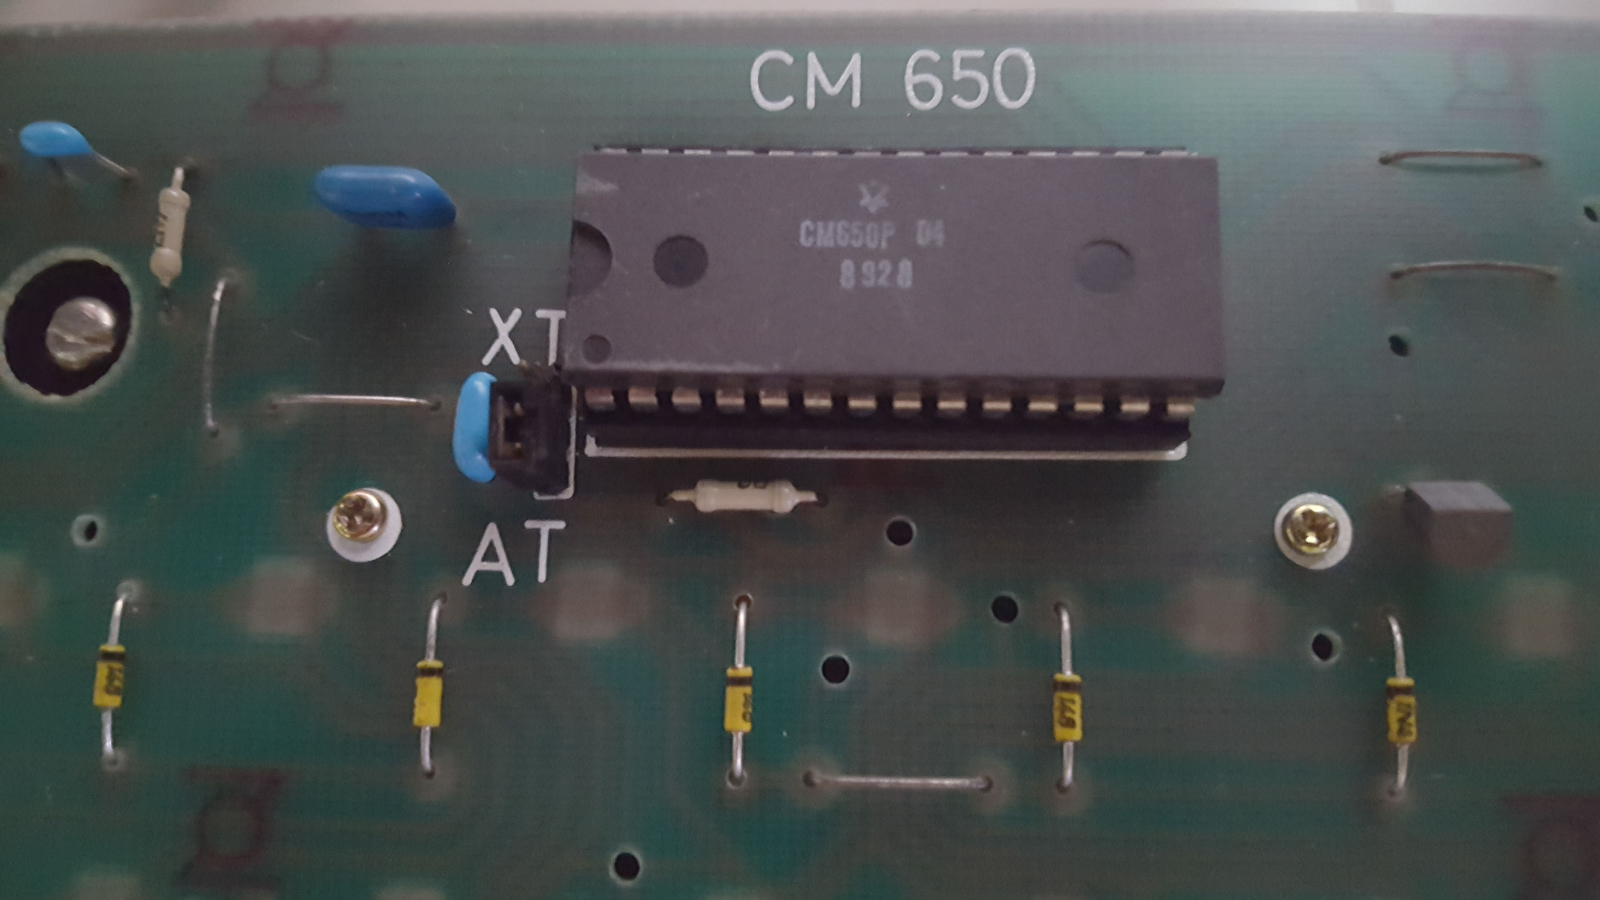 Figure 5: PCB with microcrontroller and XT/AT jumper